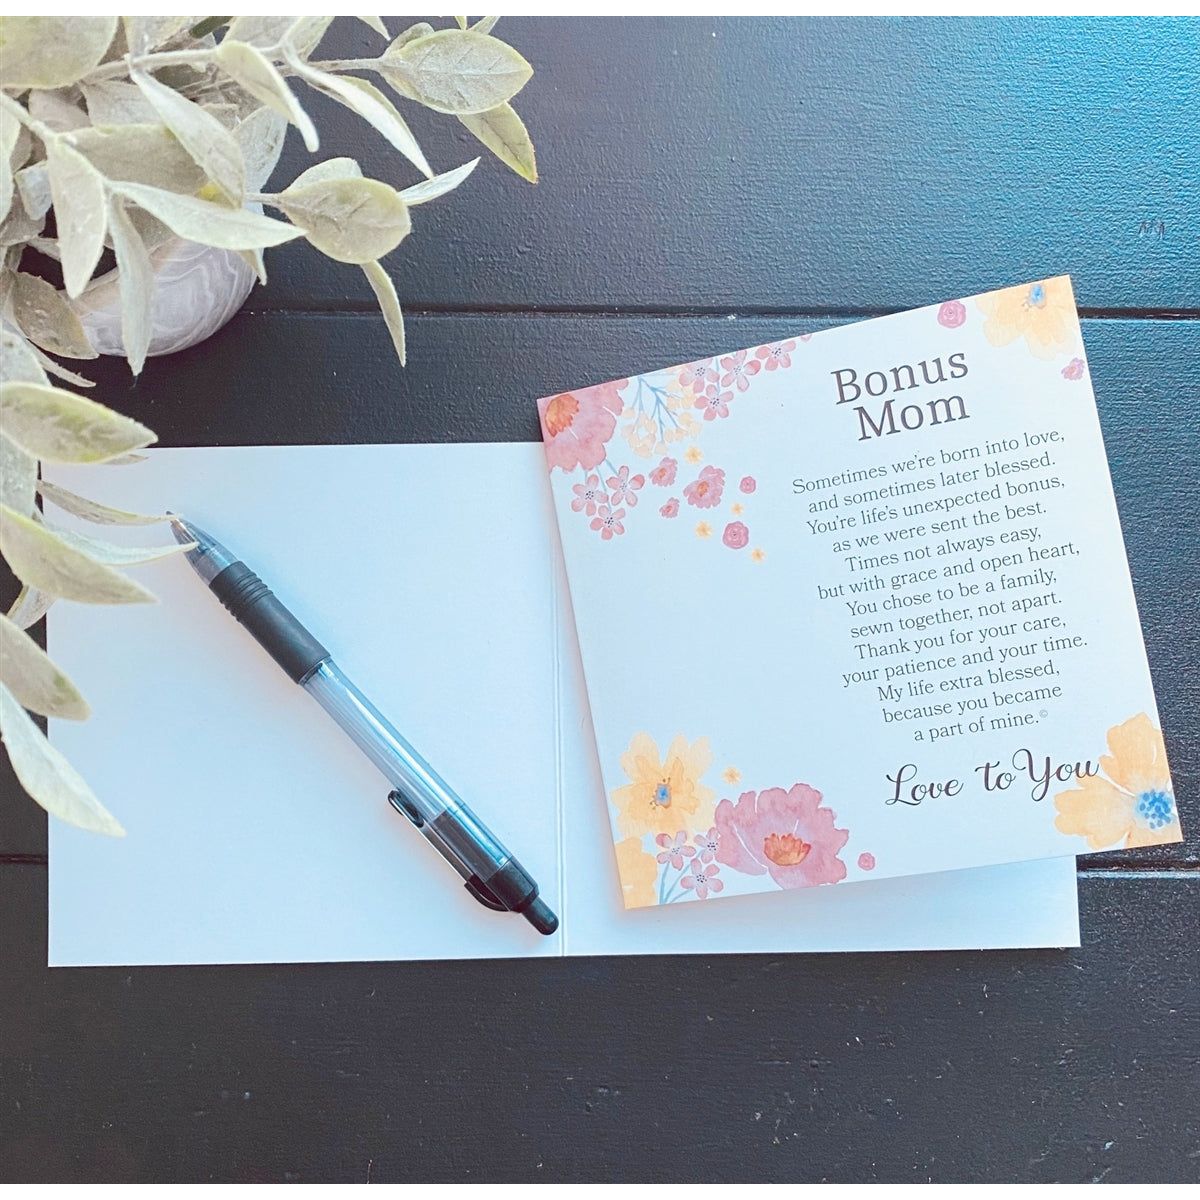 High quality folded card for the giver to write a special note to mom.